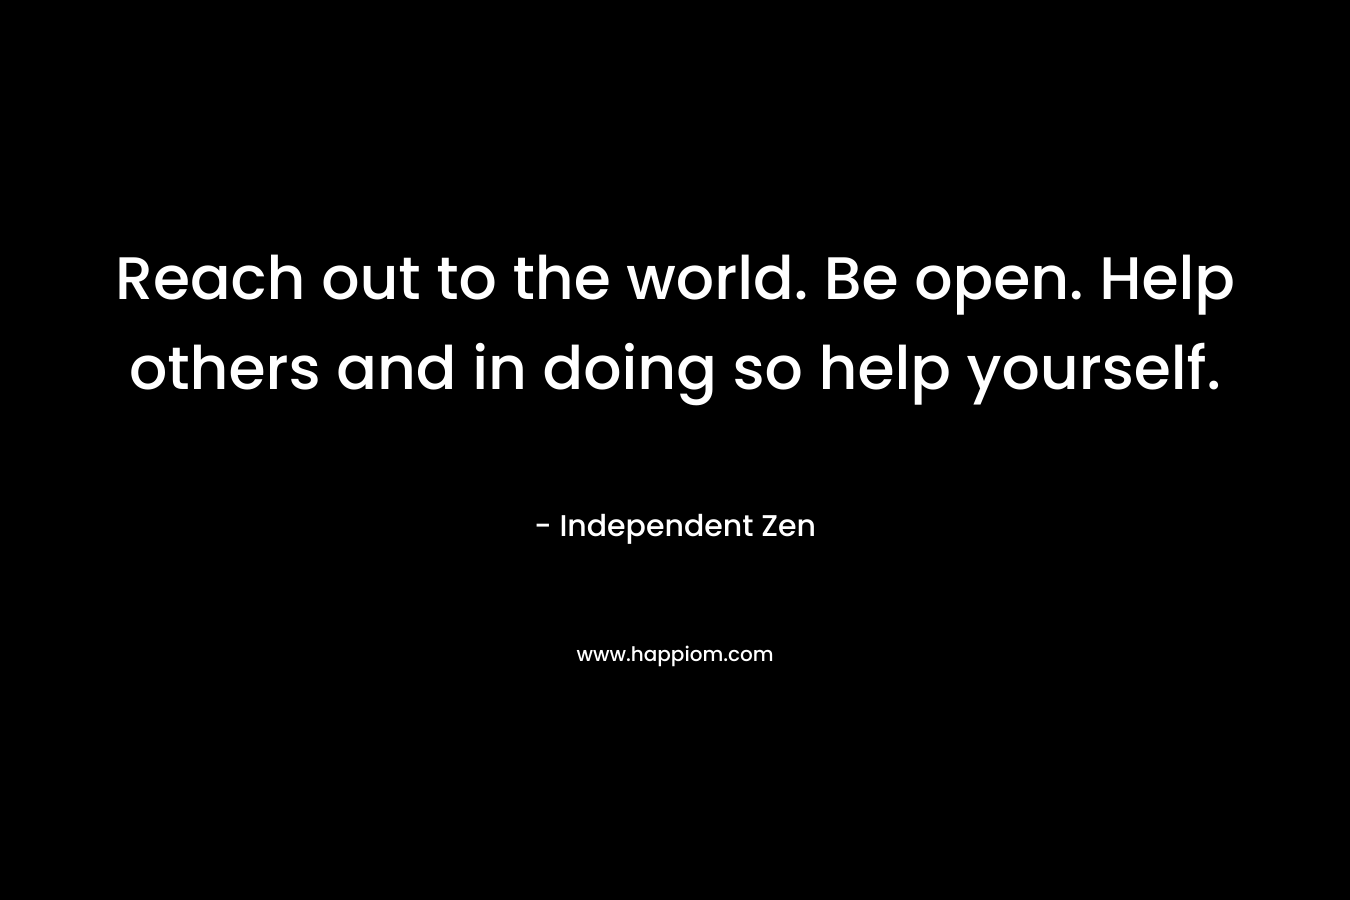 Reach out to the world. Be open. Help others and in doing so help yourself.